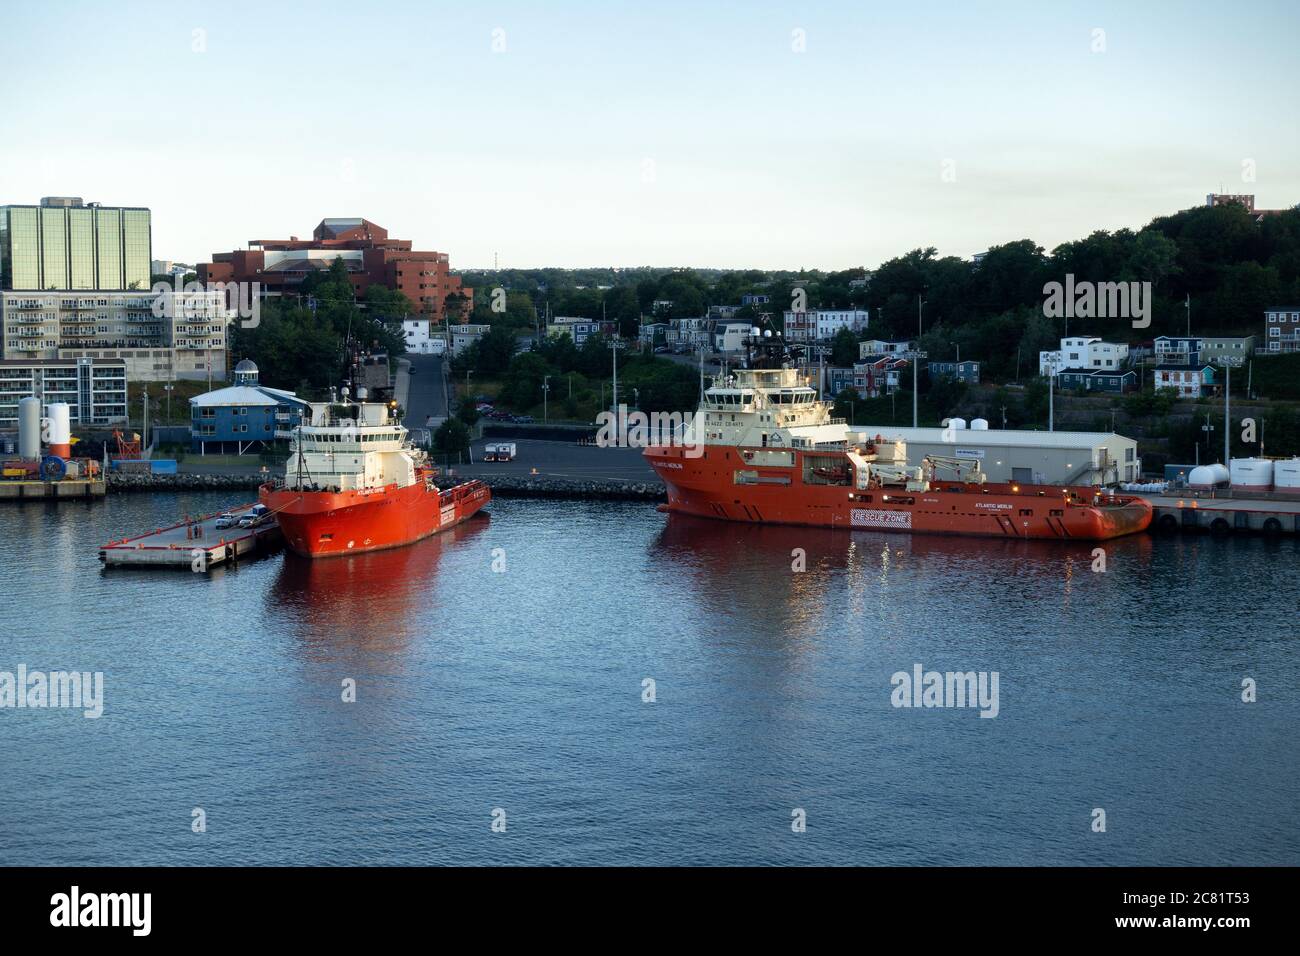 Two Offshore Supply Ships Atlantic Merlin And Atlantic Osprey In Port St John's Harbour Newfoundland Canada Stock Photo